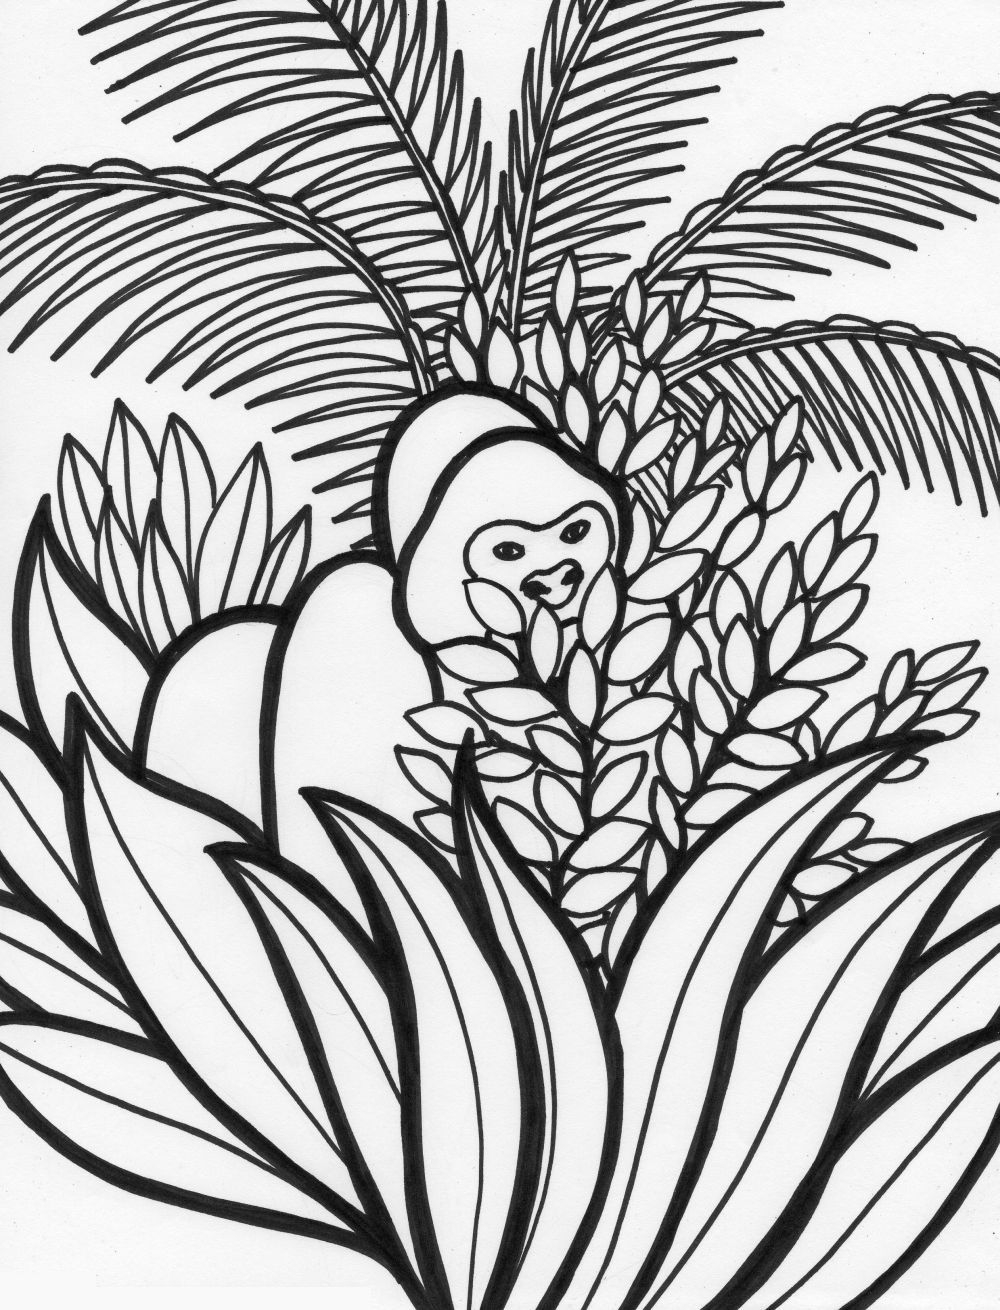 Animals In The Rainforest Coloring Pages 7 Pics Of Endangered Rainforest Animals Coloring Pages Tropical